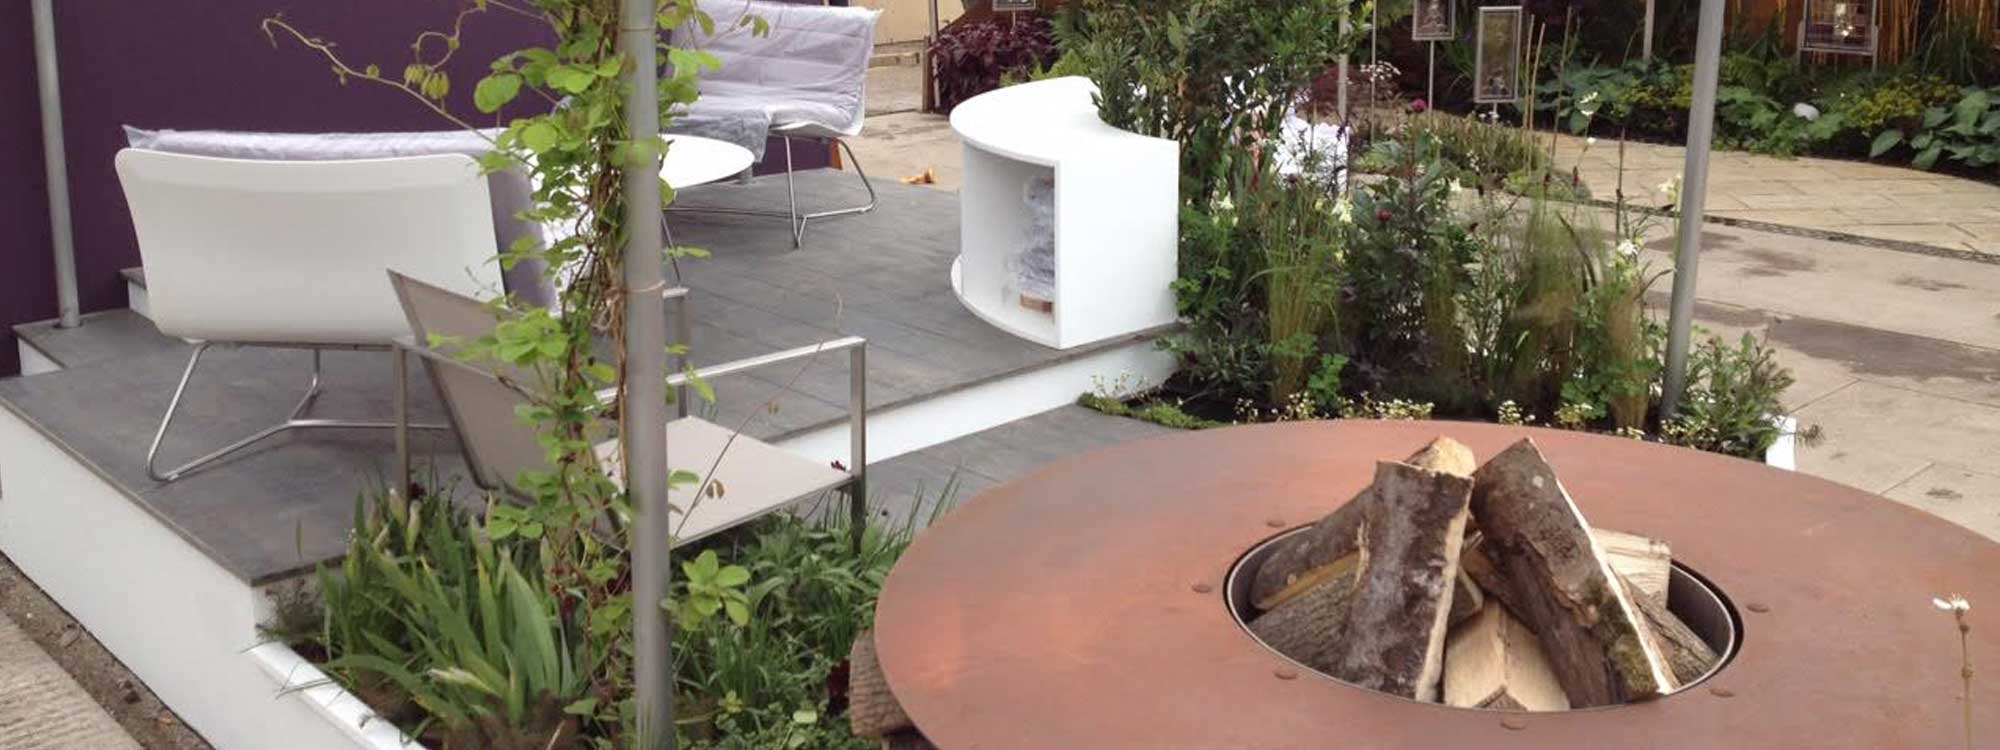 Image of Encompass Furniture stand designed by Charlotte Rowe Garden Design, shown at RHS Chelsea Flower Show.